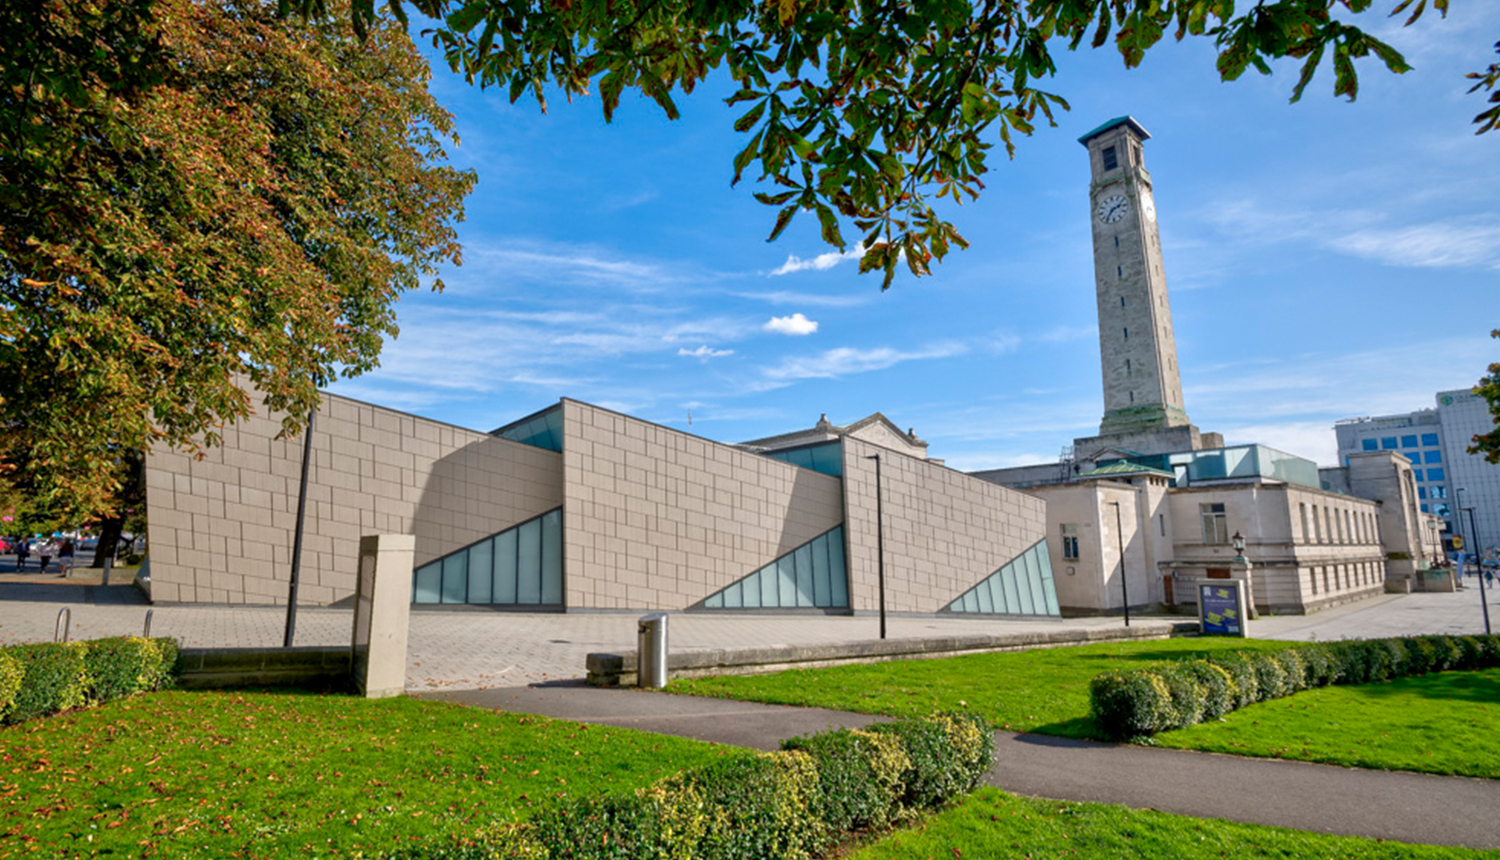 Top 10 things to do in Southampton 2019 - Seacity Museum